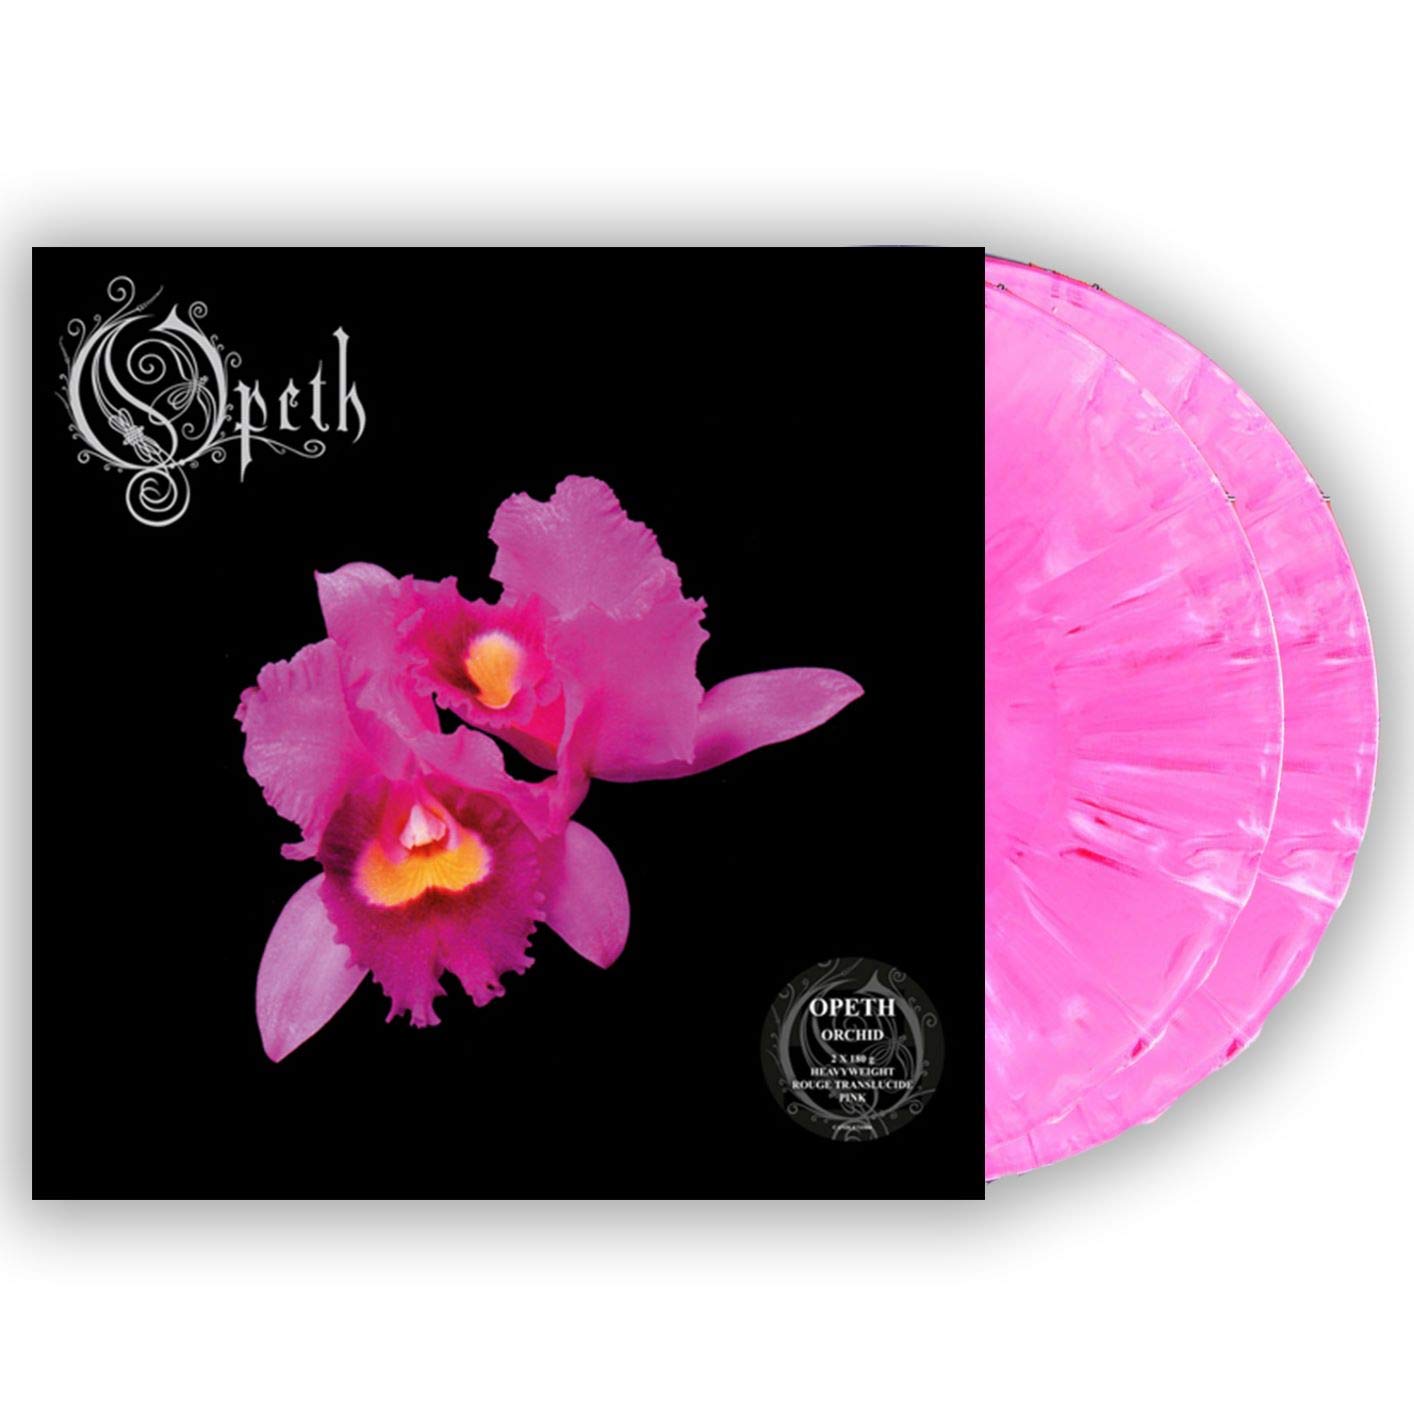 OPETH - Orchid - 2LP - Limited Pink Marble Swirl Vinyl [RSD2020-AUG29]